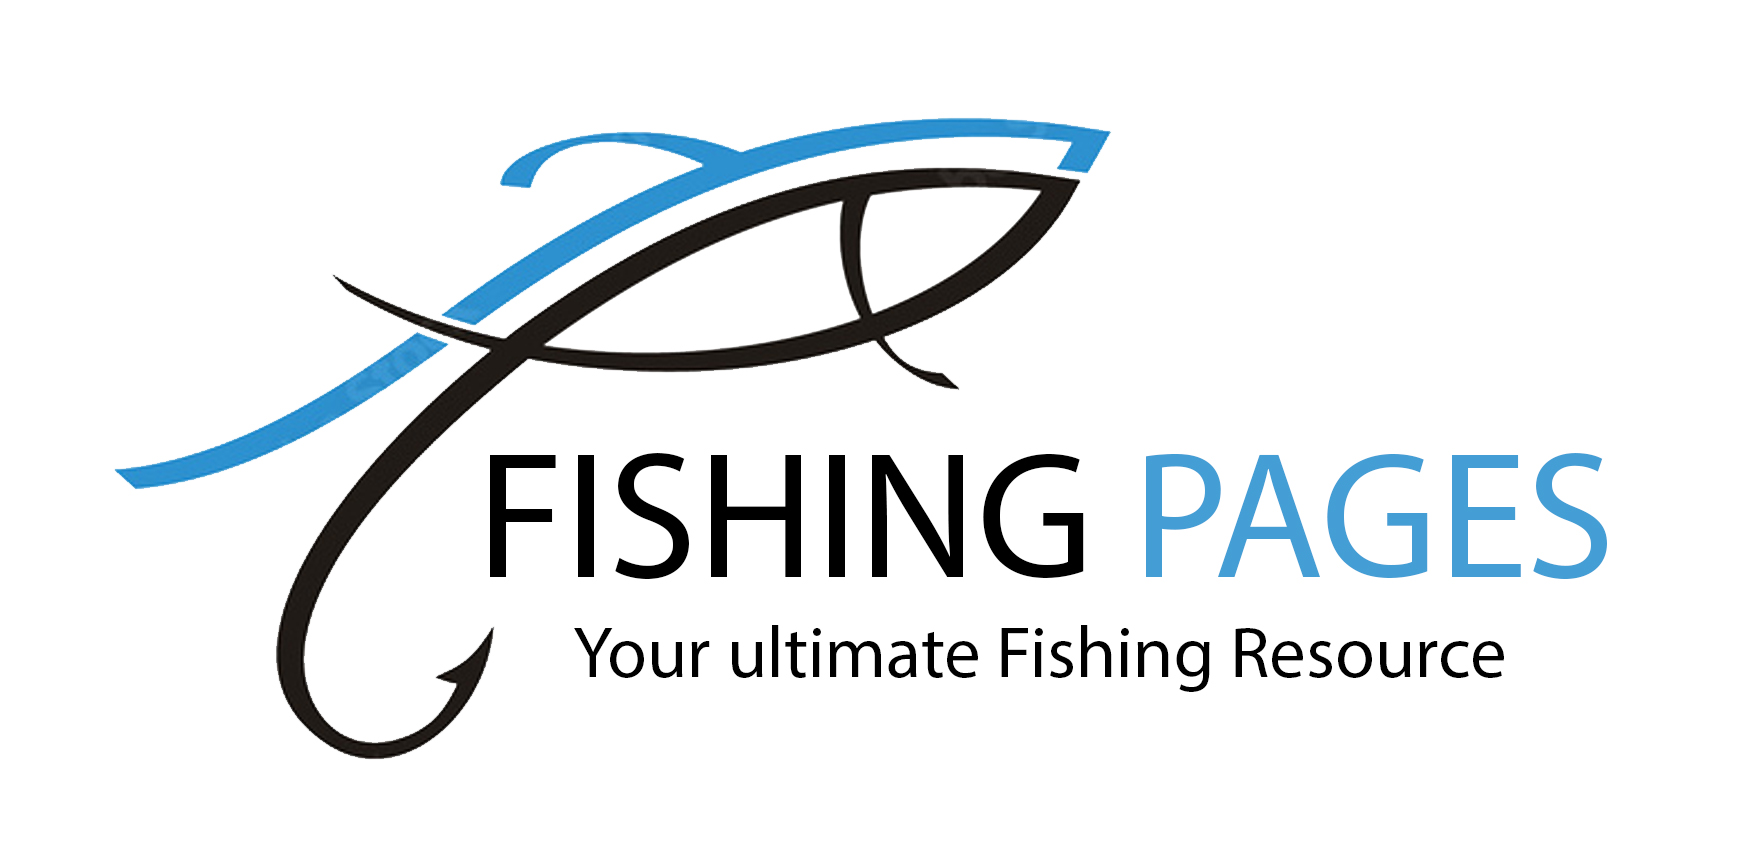 FishingPages Past Events